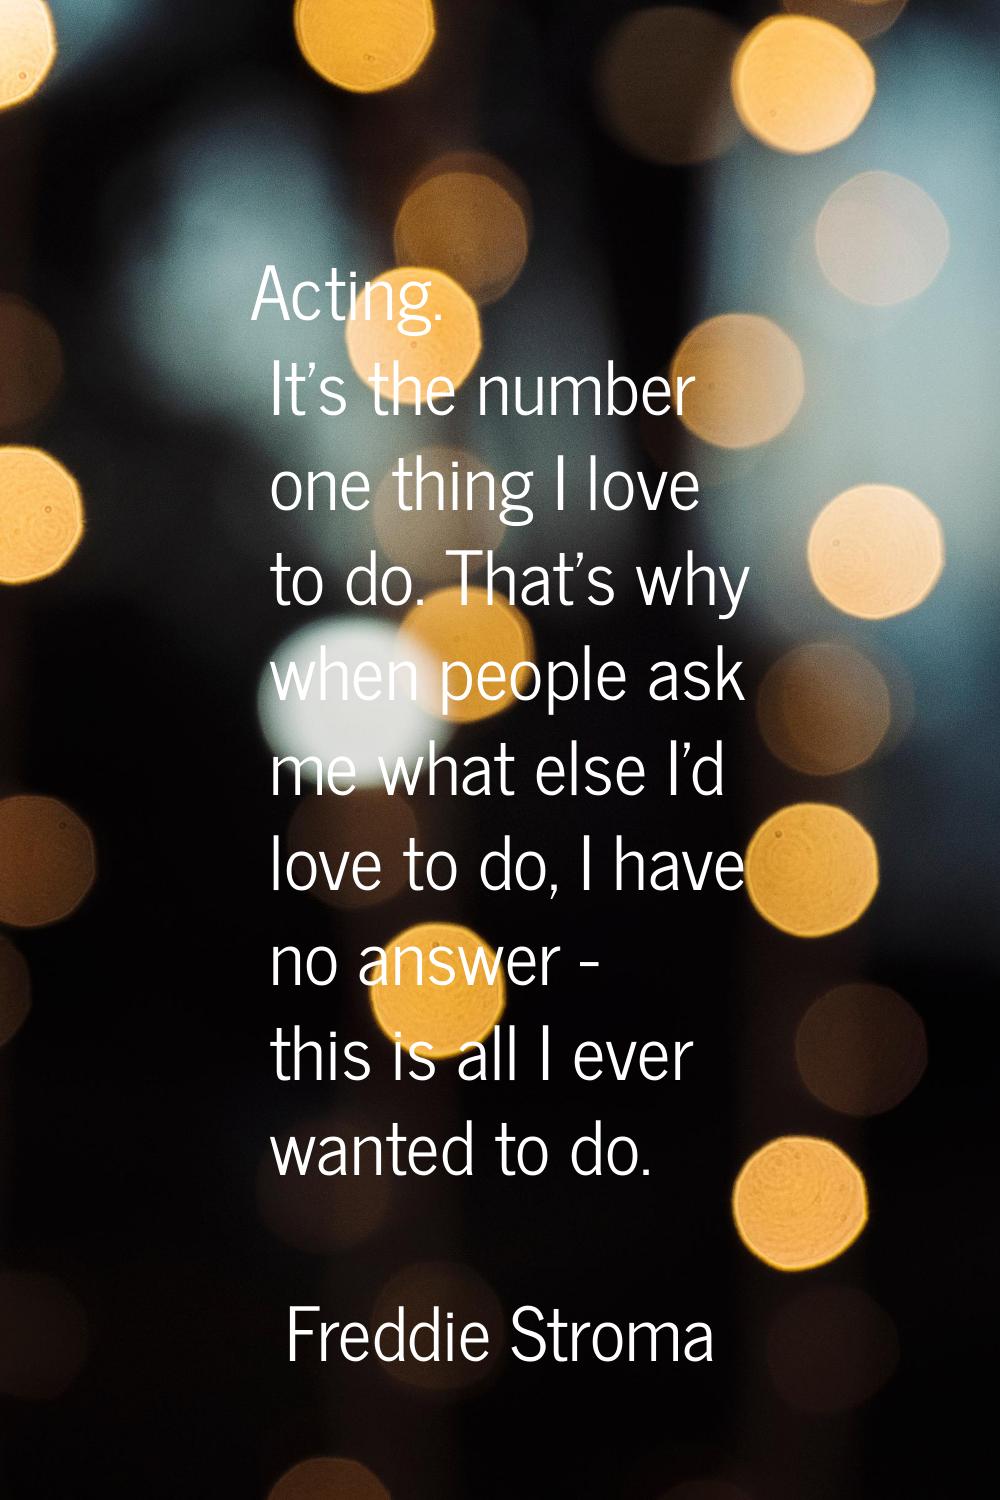 Acting. It's the number one thing I love to do. That's why when people ask me what else I'd love to